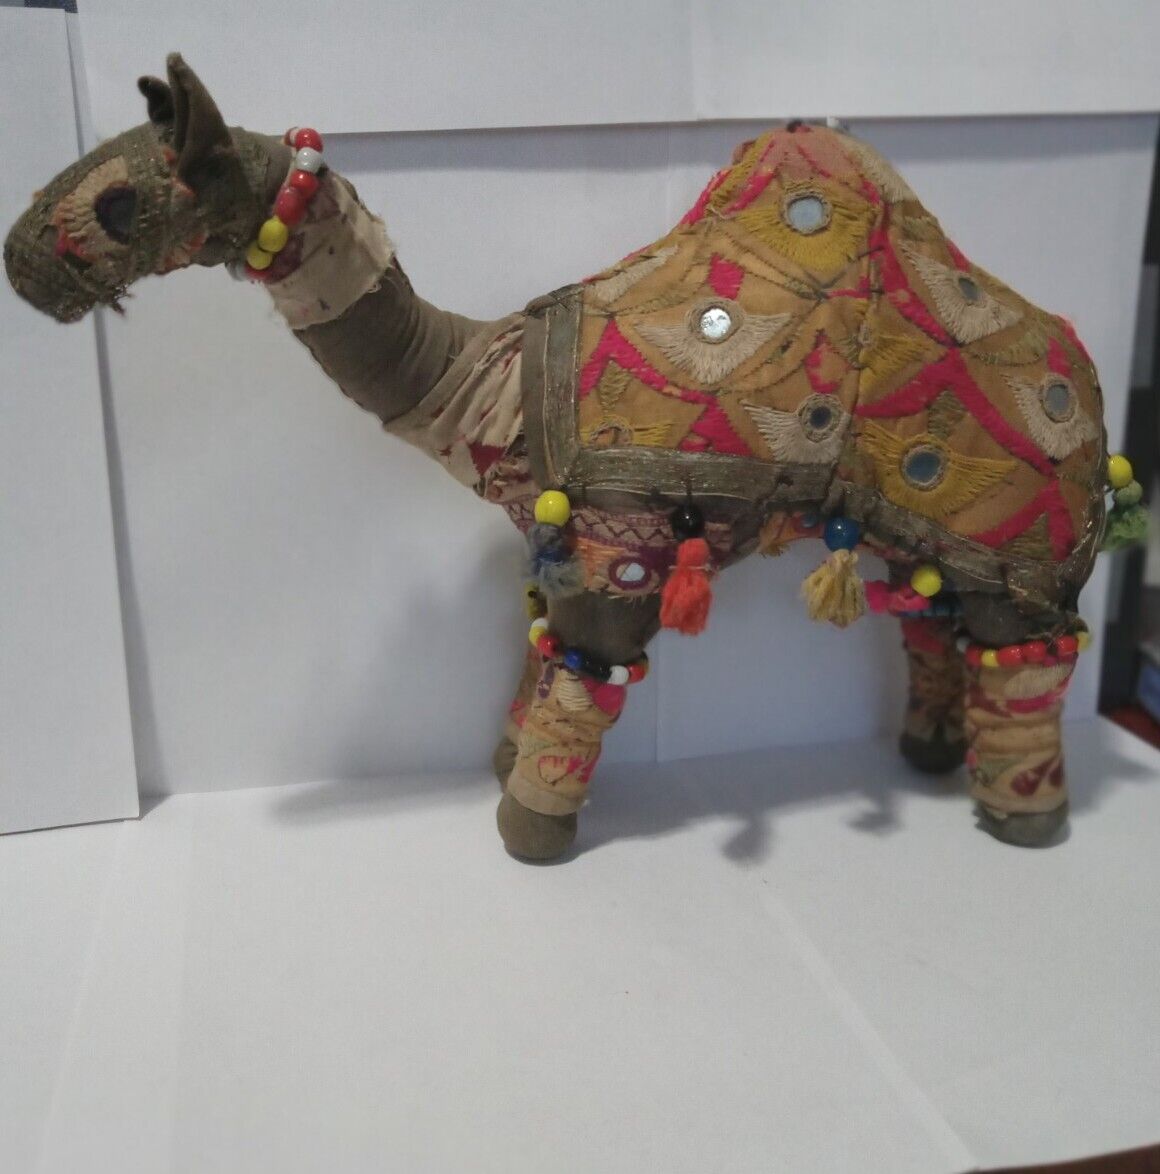 HANDCRAFTED 1950s RAJASTHAN EMBROIDERED FABRIC COVERED STUFFED CAMEL TOY India